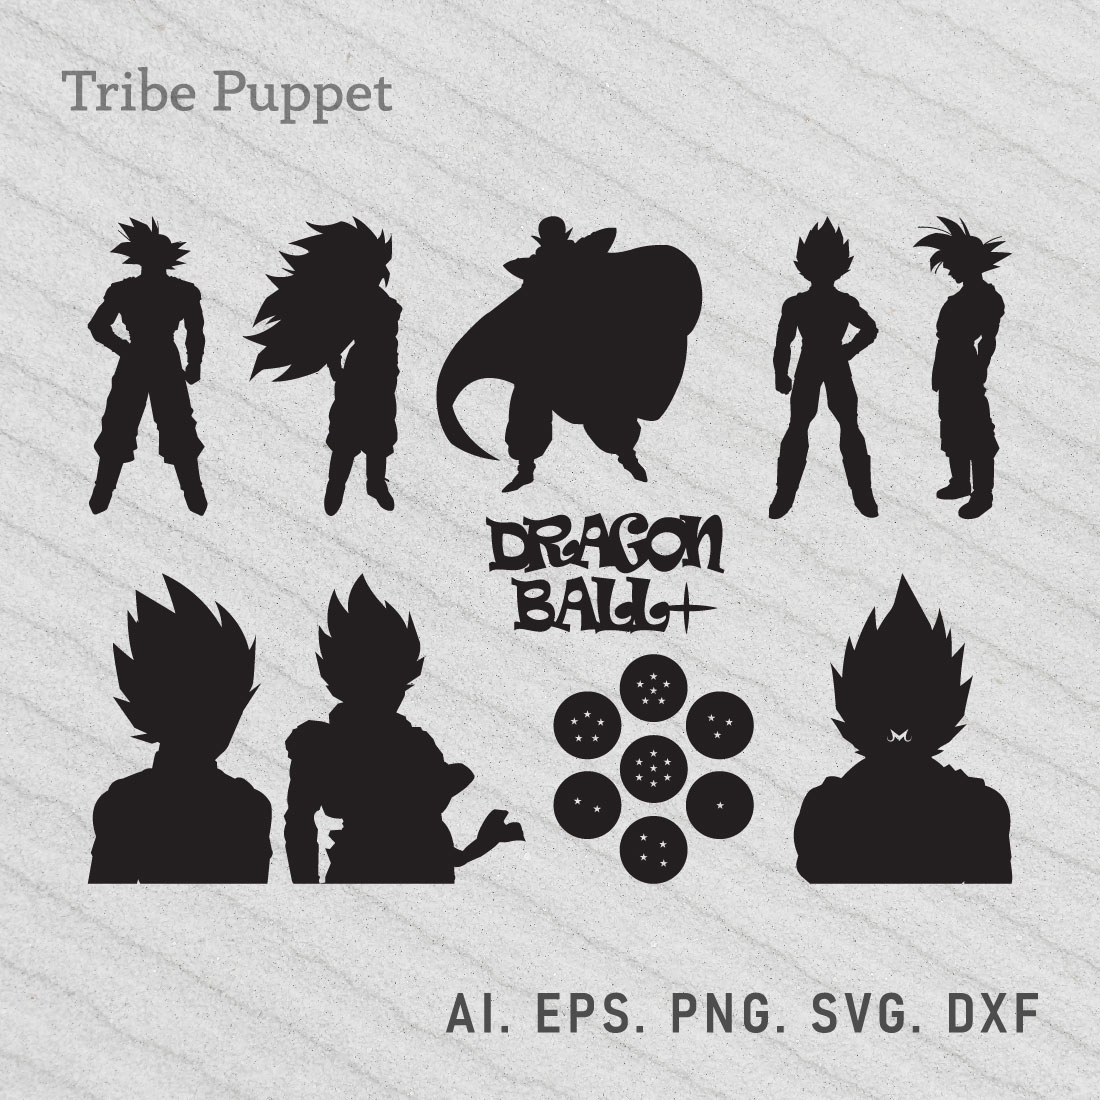 The silhouettes of dragon ball characters.